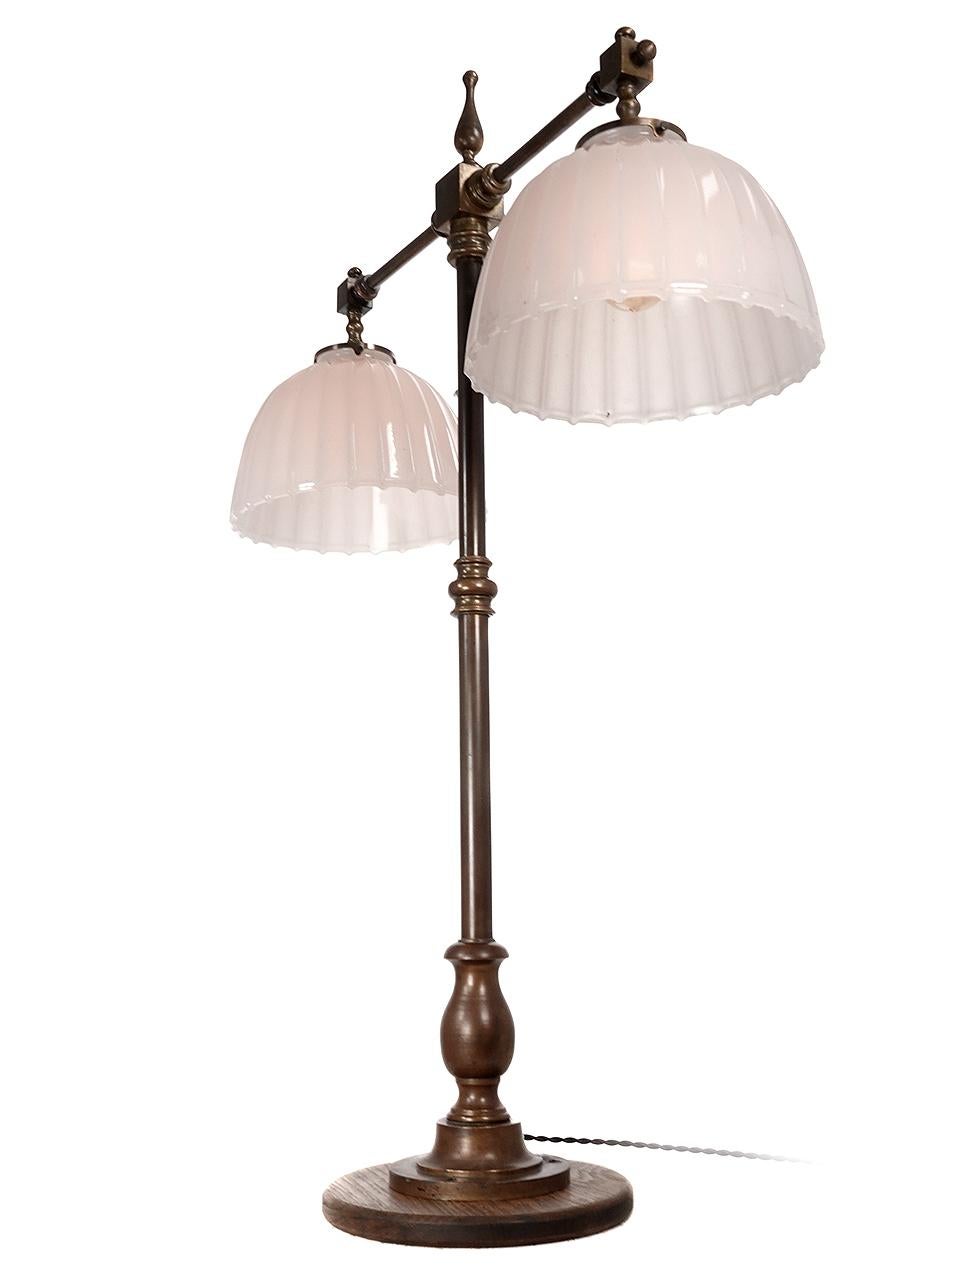 This is a very impressive desk/counter top bank lamp. Its stands 41 inches tall. The metal is all bronze in the original finish. There are 2 heavy clam broth fluted domes that each have an 11 inch diameter. This type of fixture was designed to bolt